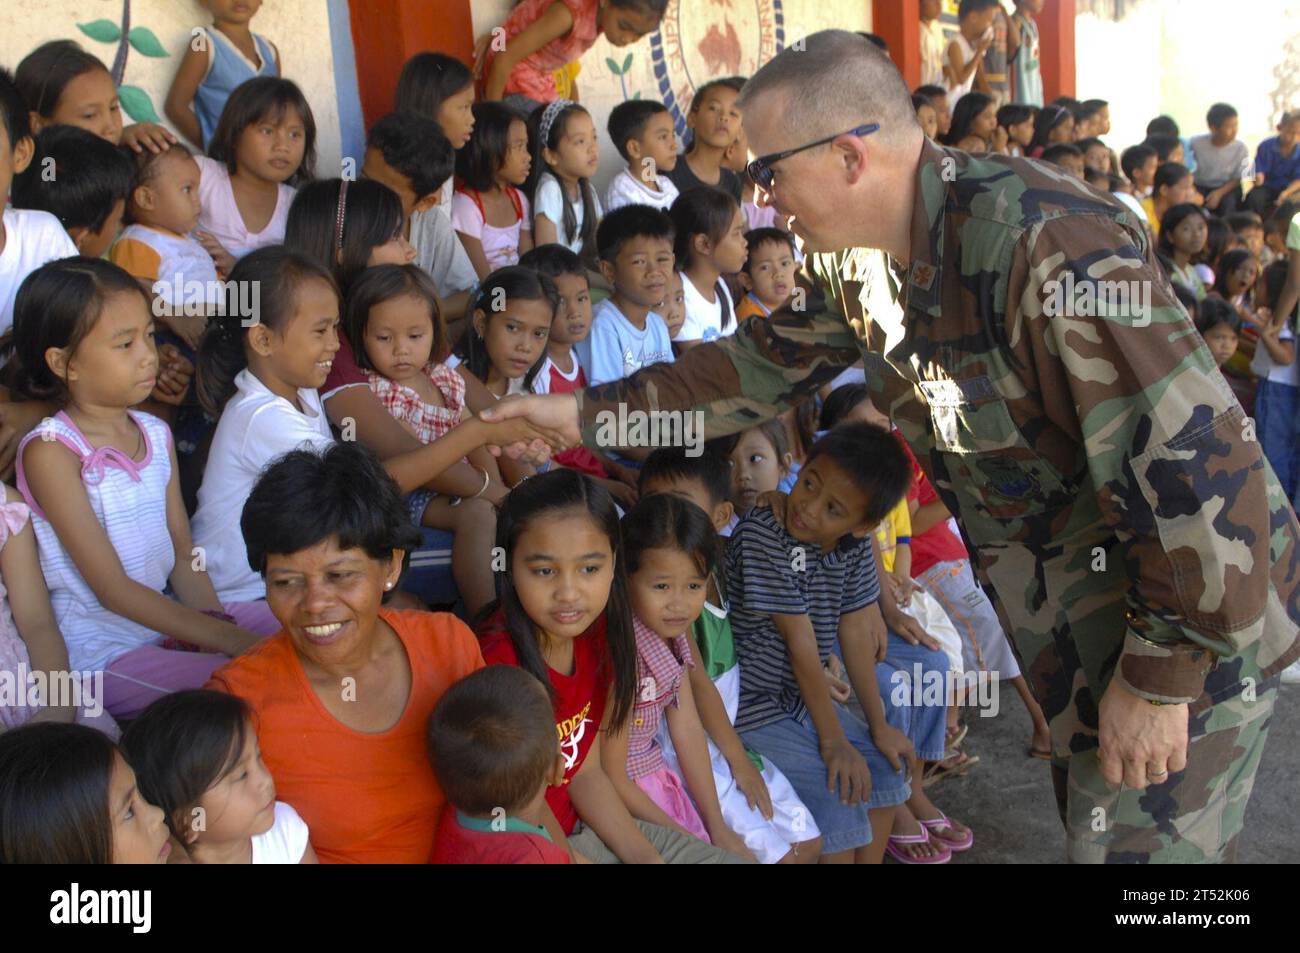 0712157286M-010 ZAMBOANGA CITY, Philippines (Dec. 15, 2007) U.S. Air Force Chaplin, Maj. Philip G. Houser meets with the children at MEIN College. Sailors, Airmen and Soldiers assigned to Joint Special Operations Task Force-Philippines (JSOTF-P) assisted MEIN College, INC. and the Kiwanis Club of METRO Zamboanga in handing out presents for the holidays at the as part of their annual community outreach program. U.S. Navy Stock Photo